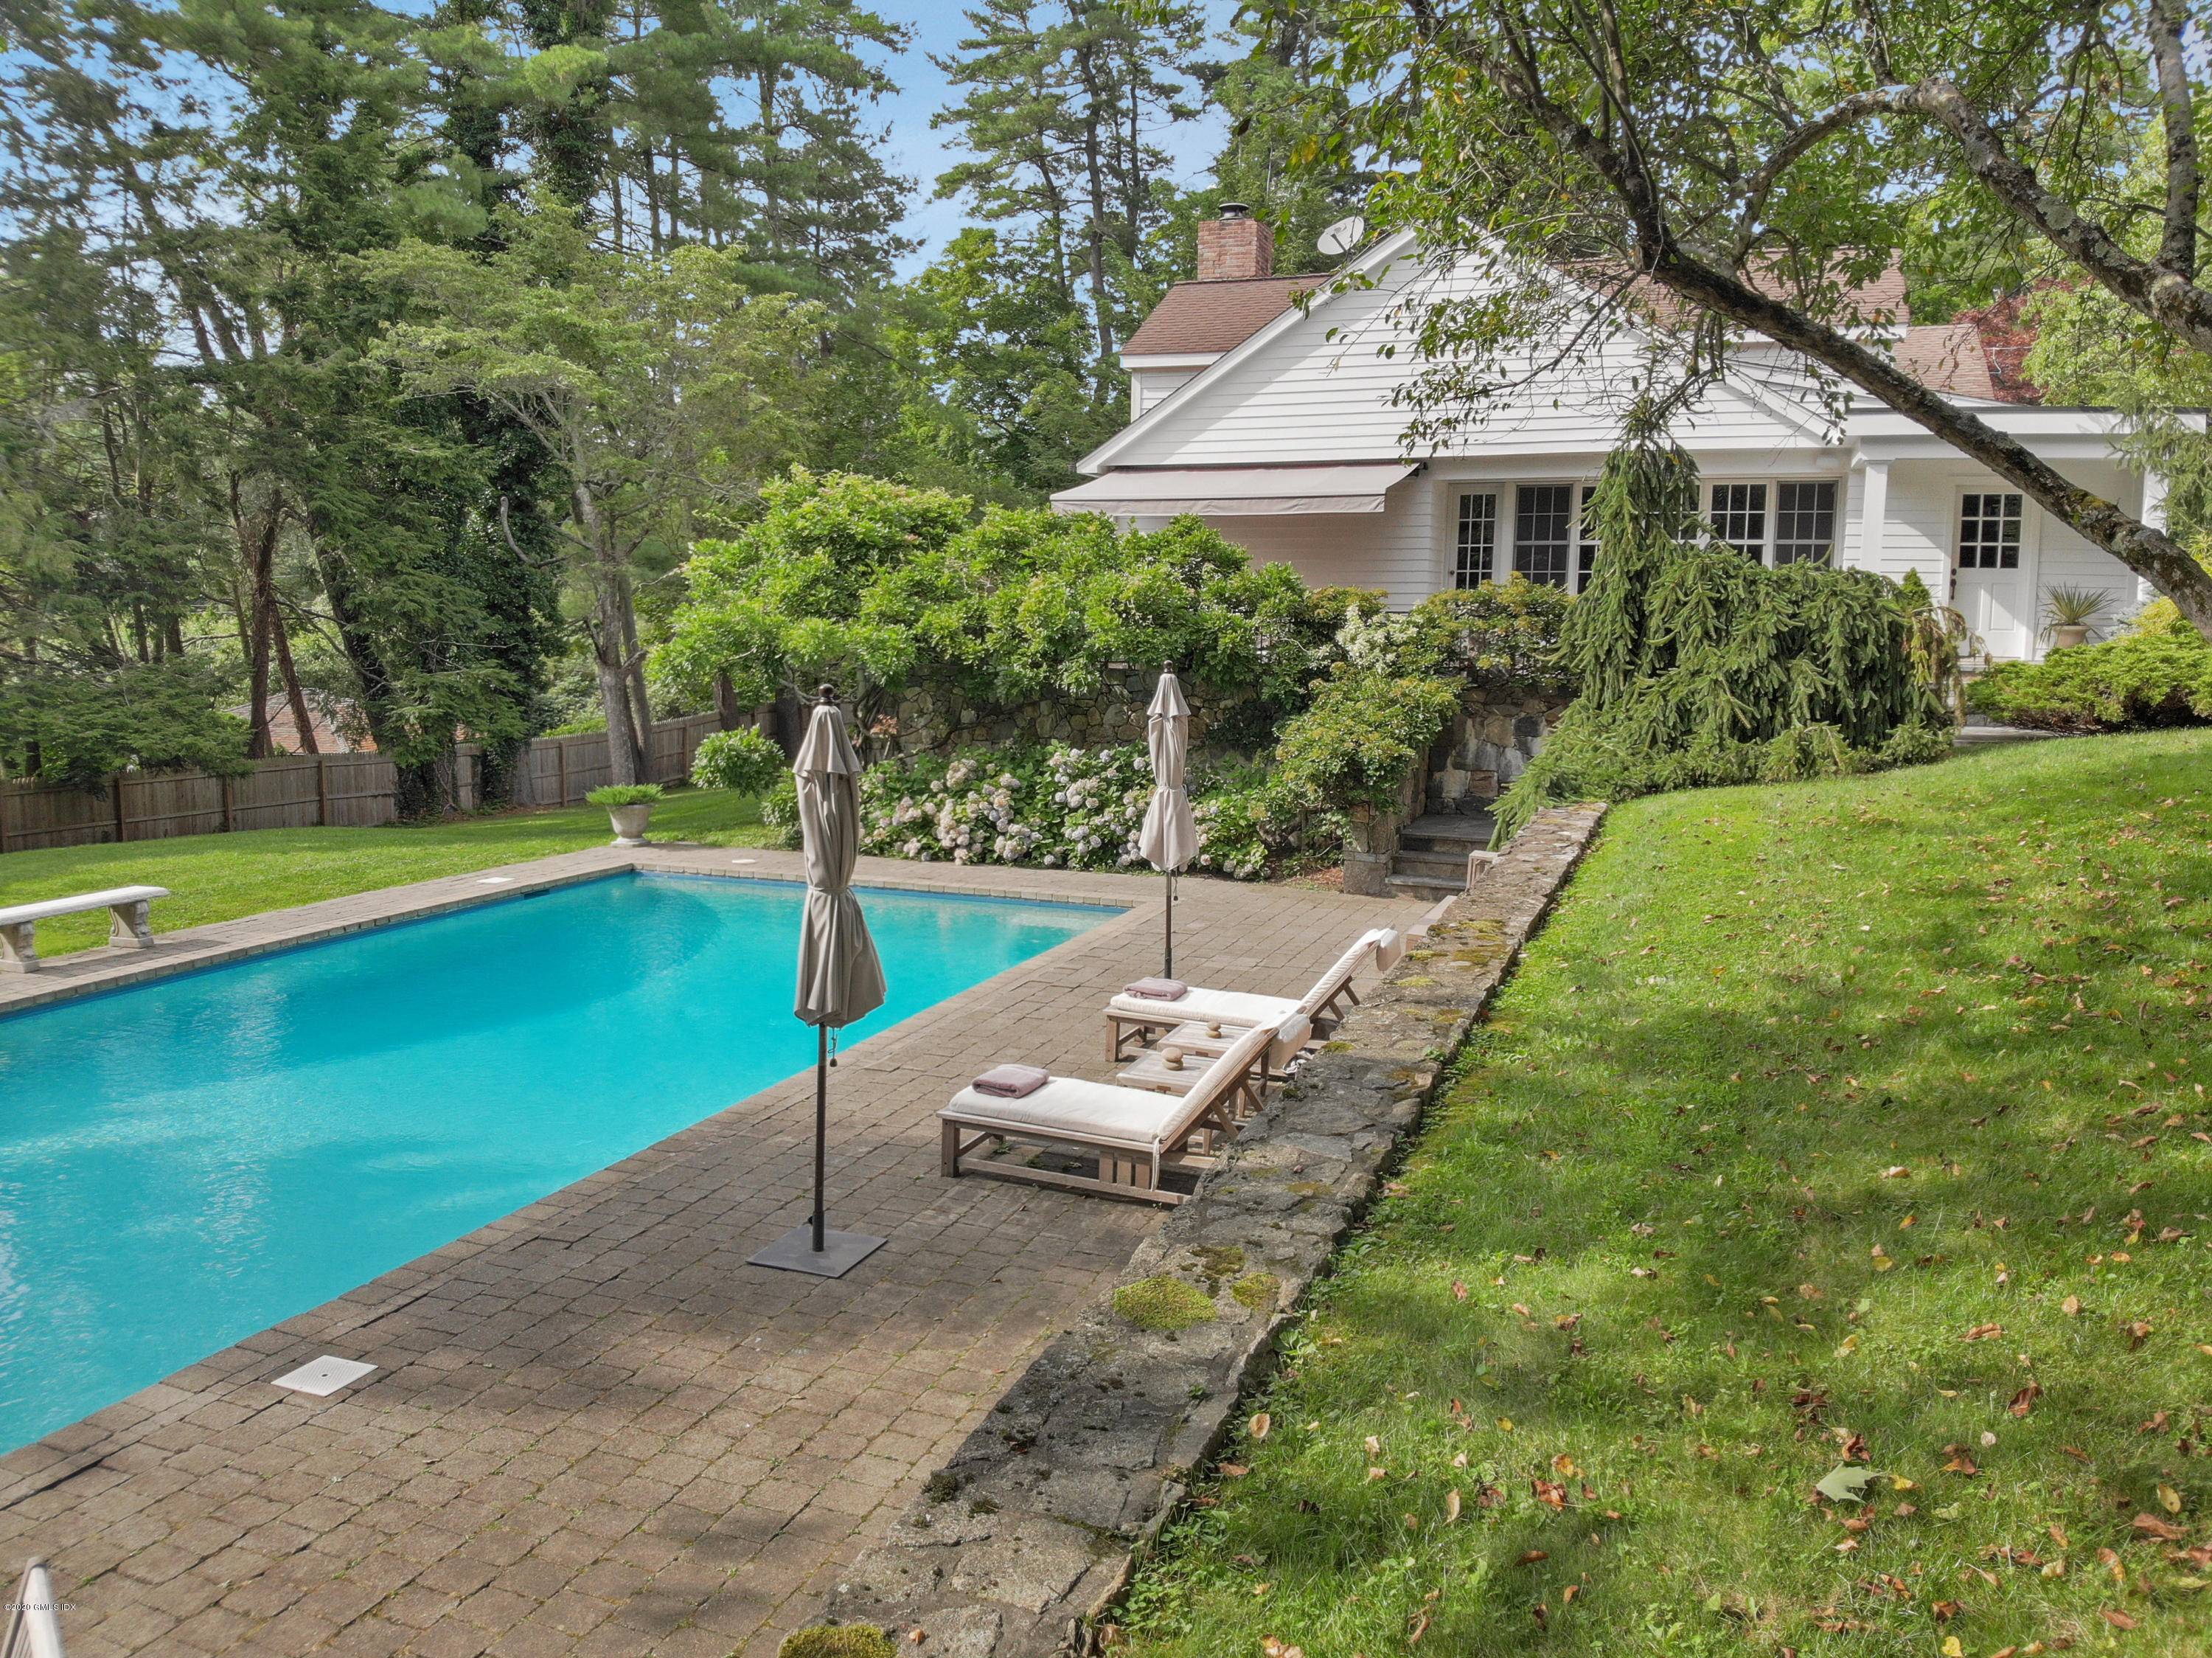 Stone walls abound this elegant country home set off Stanwich Road, and walking distance to Greenwich Country Day School.